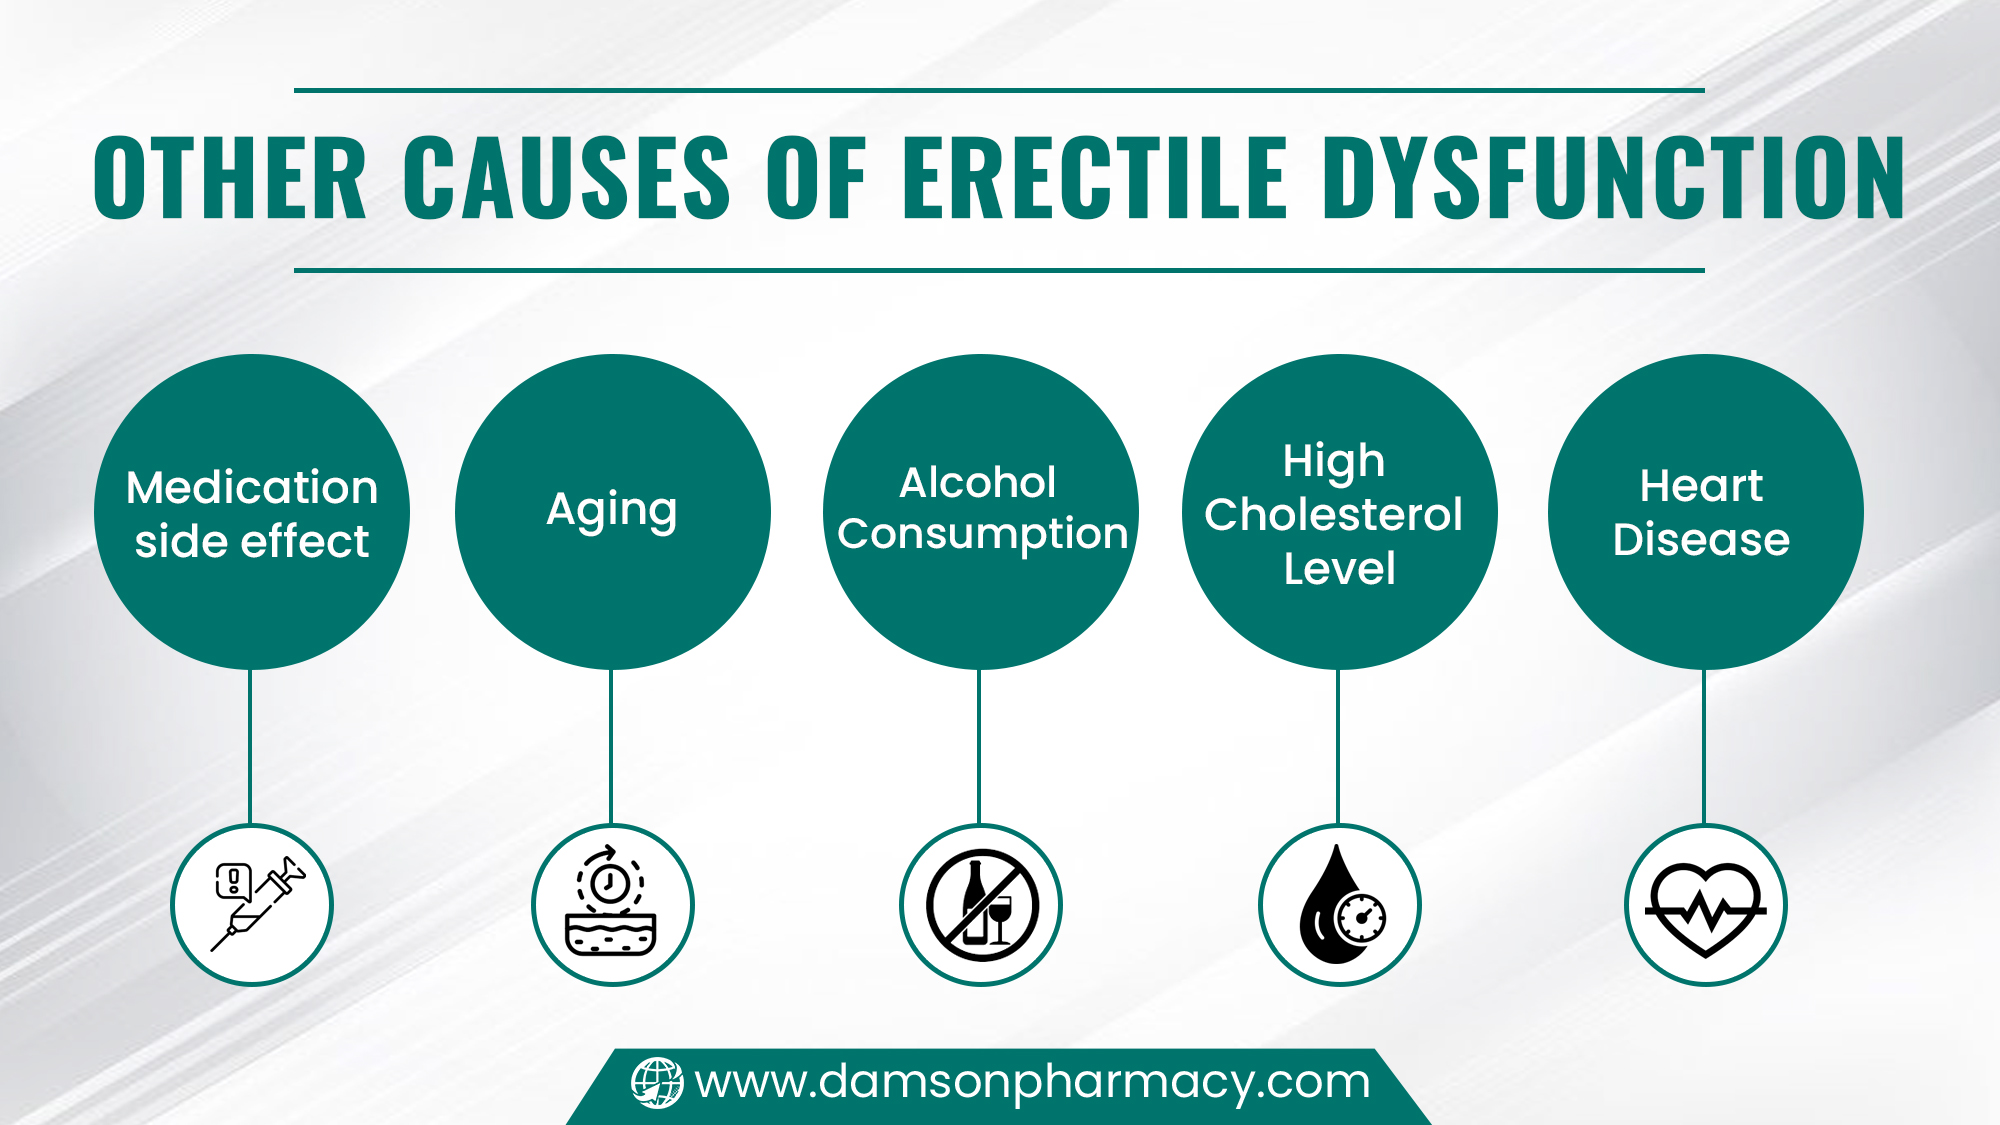 Other Causes of Erectile Dysfunction